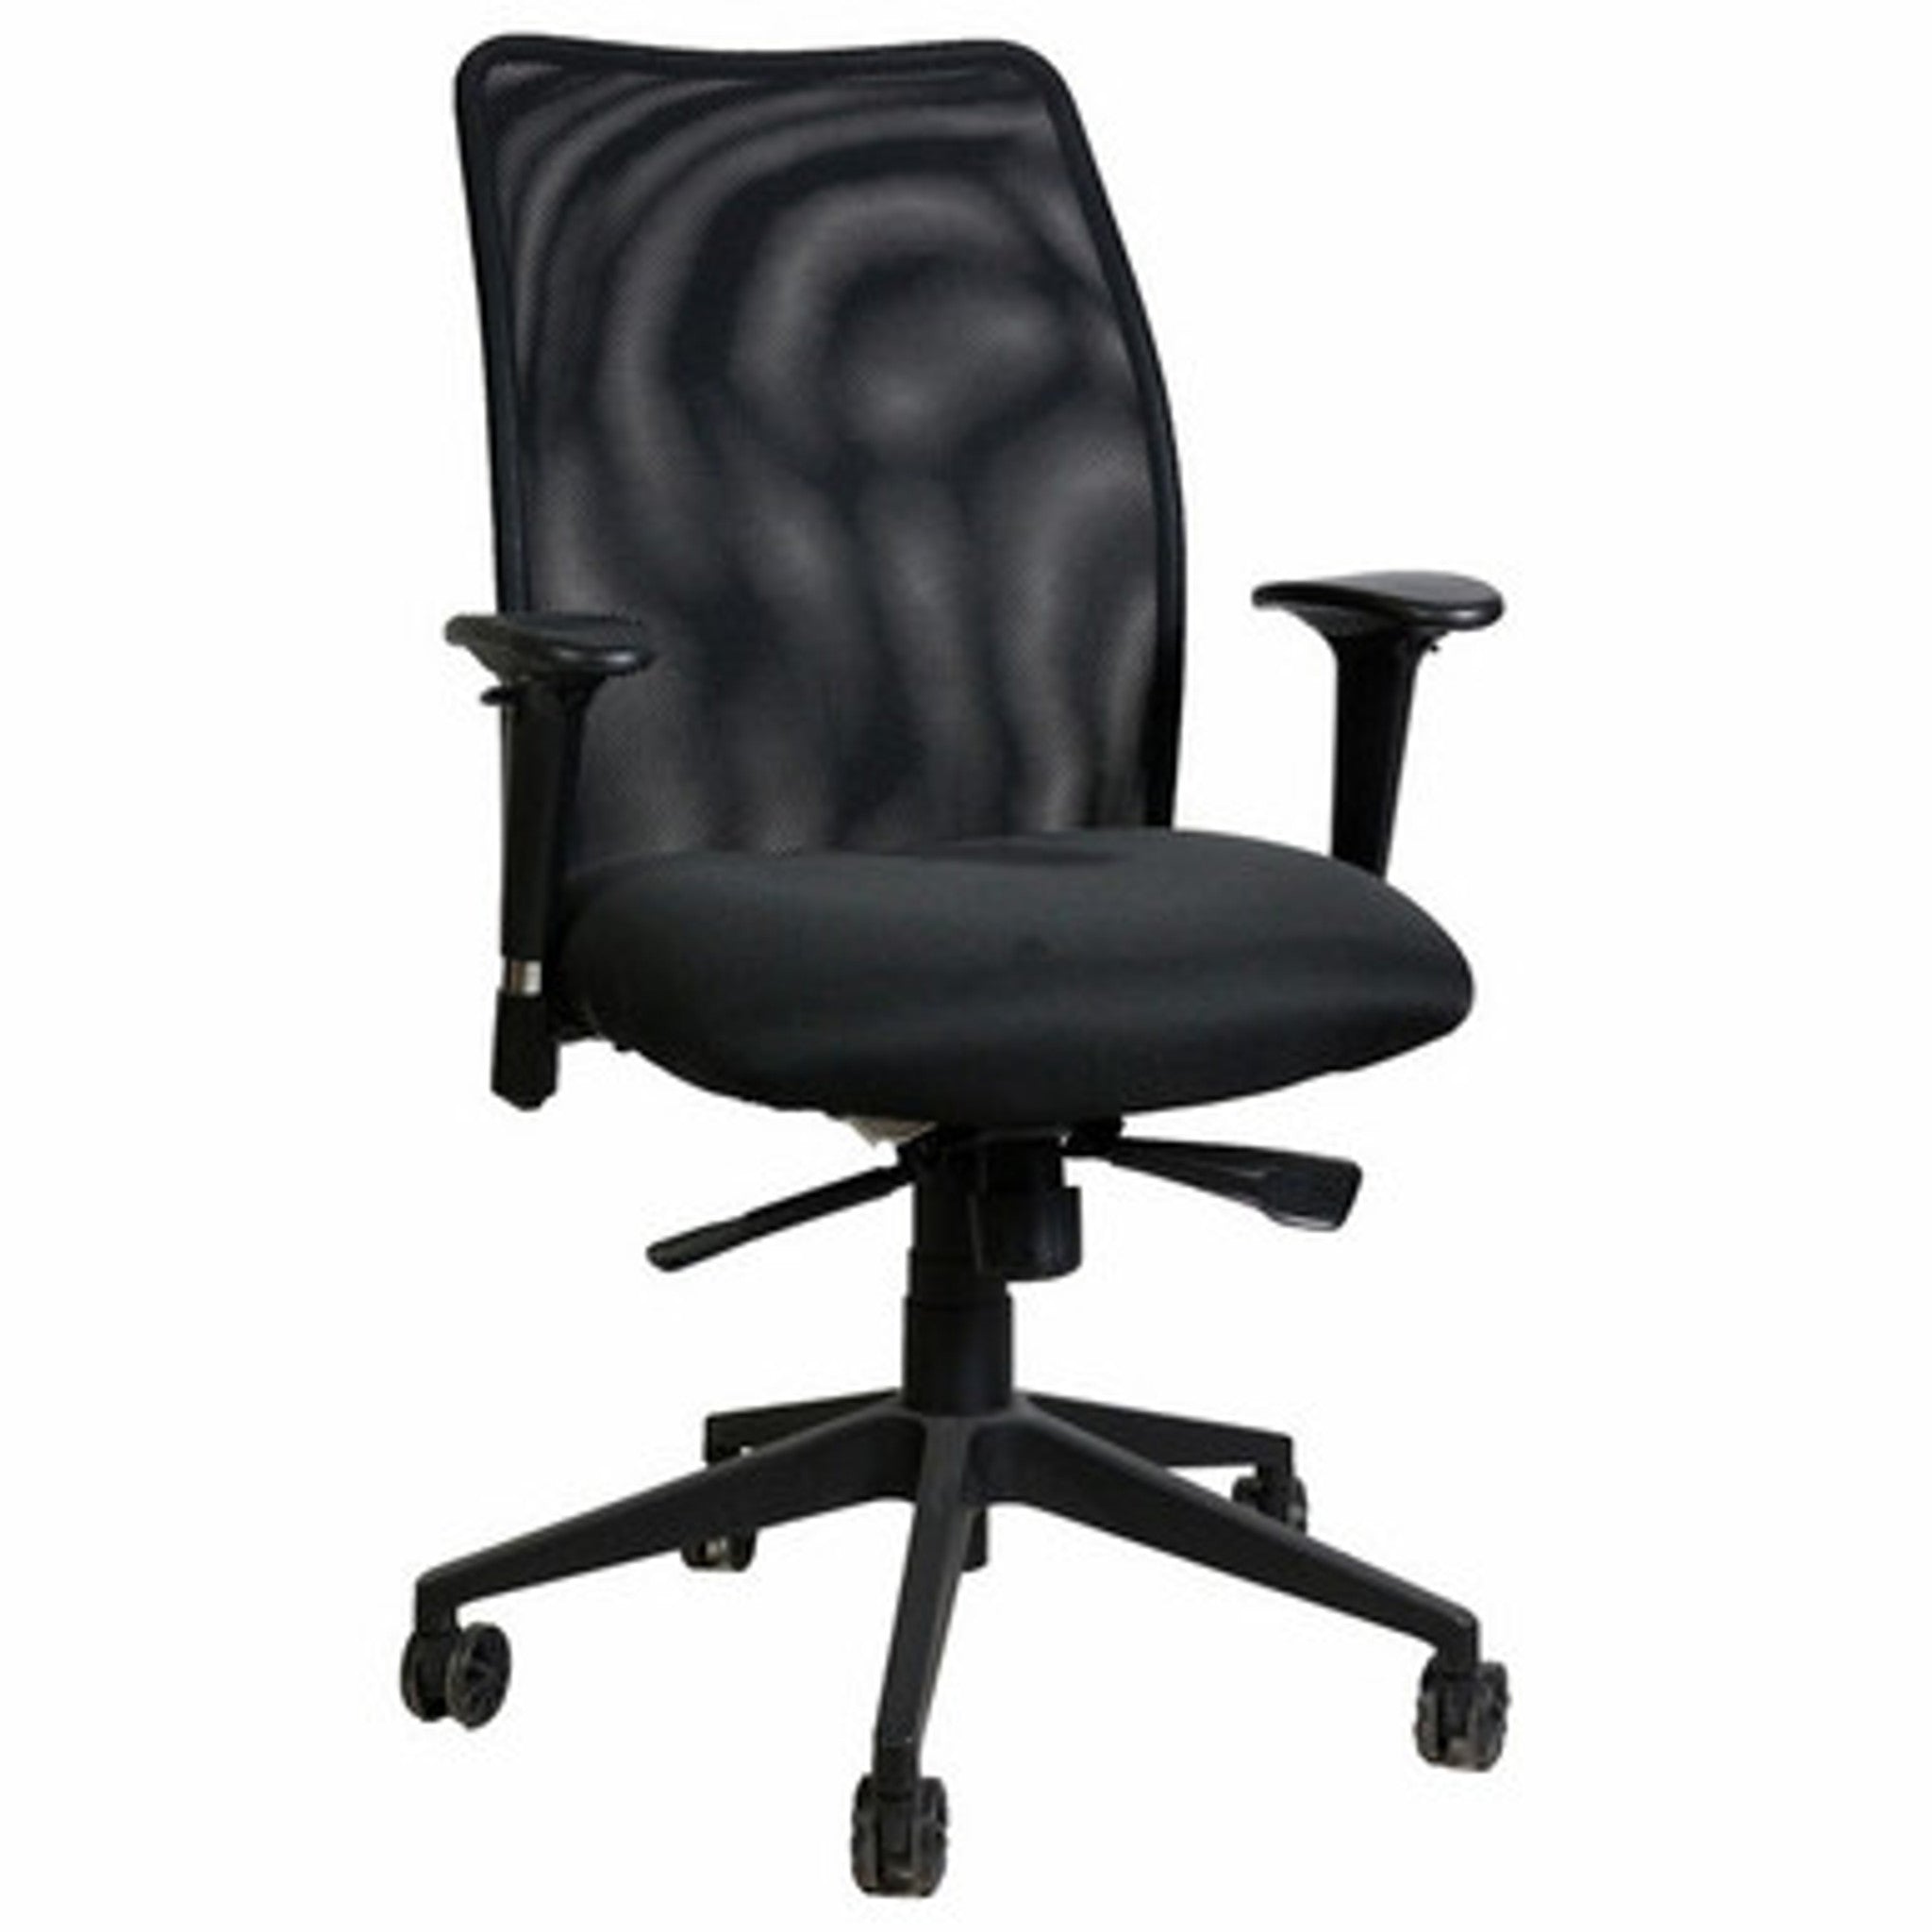 Compel Argos Task Chair, Black - New CLOSEOUT